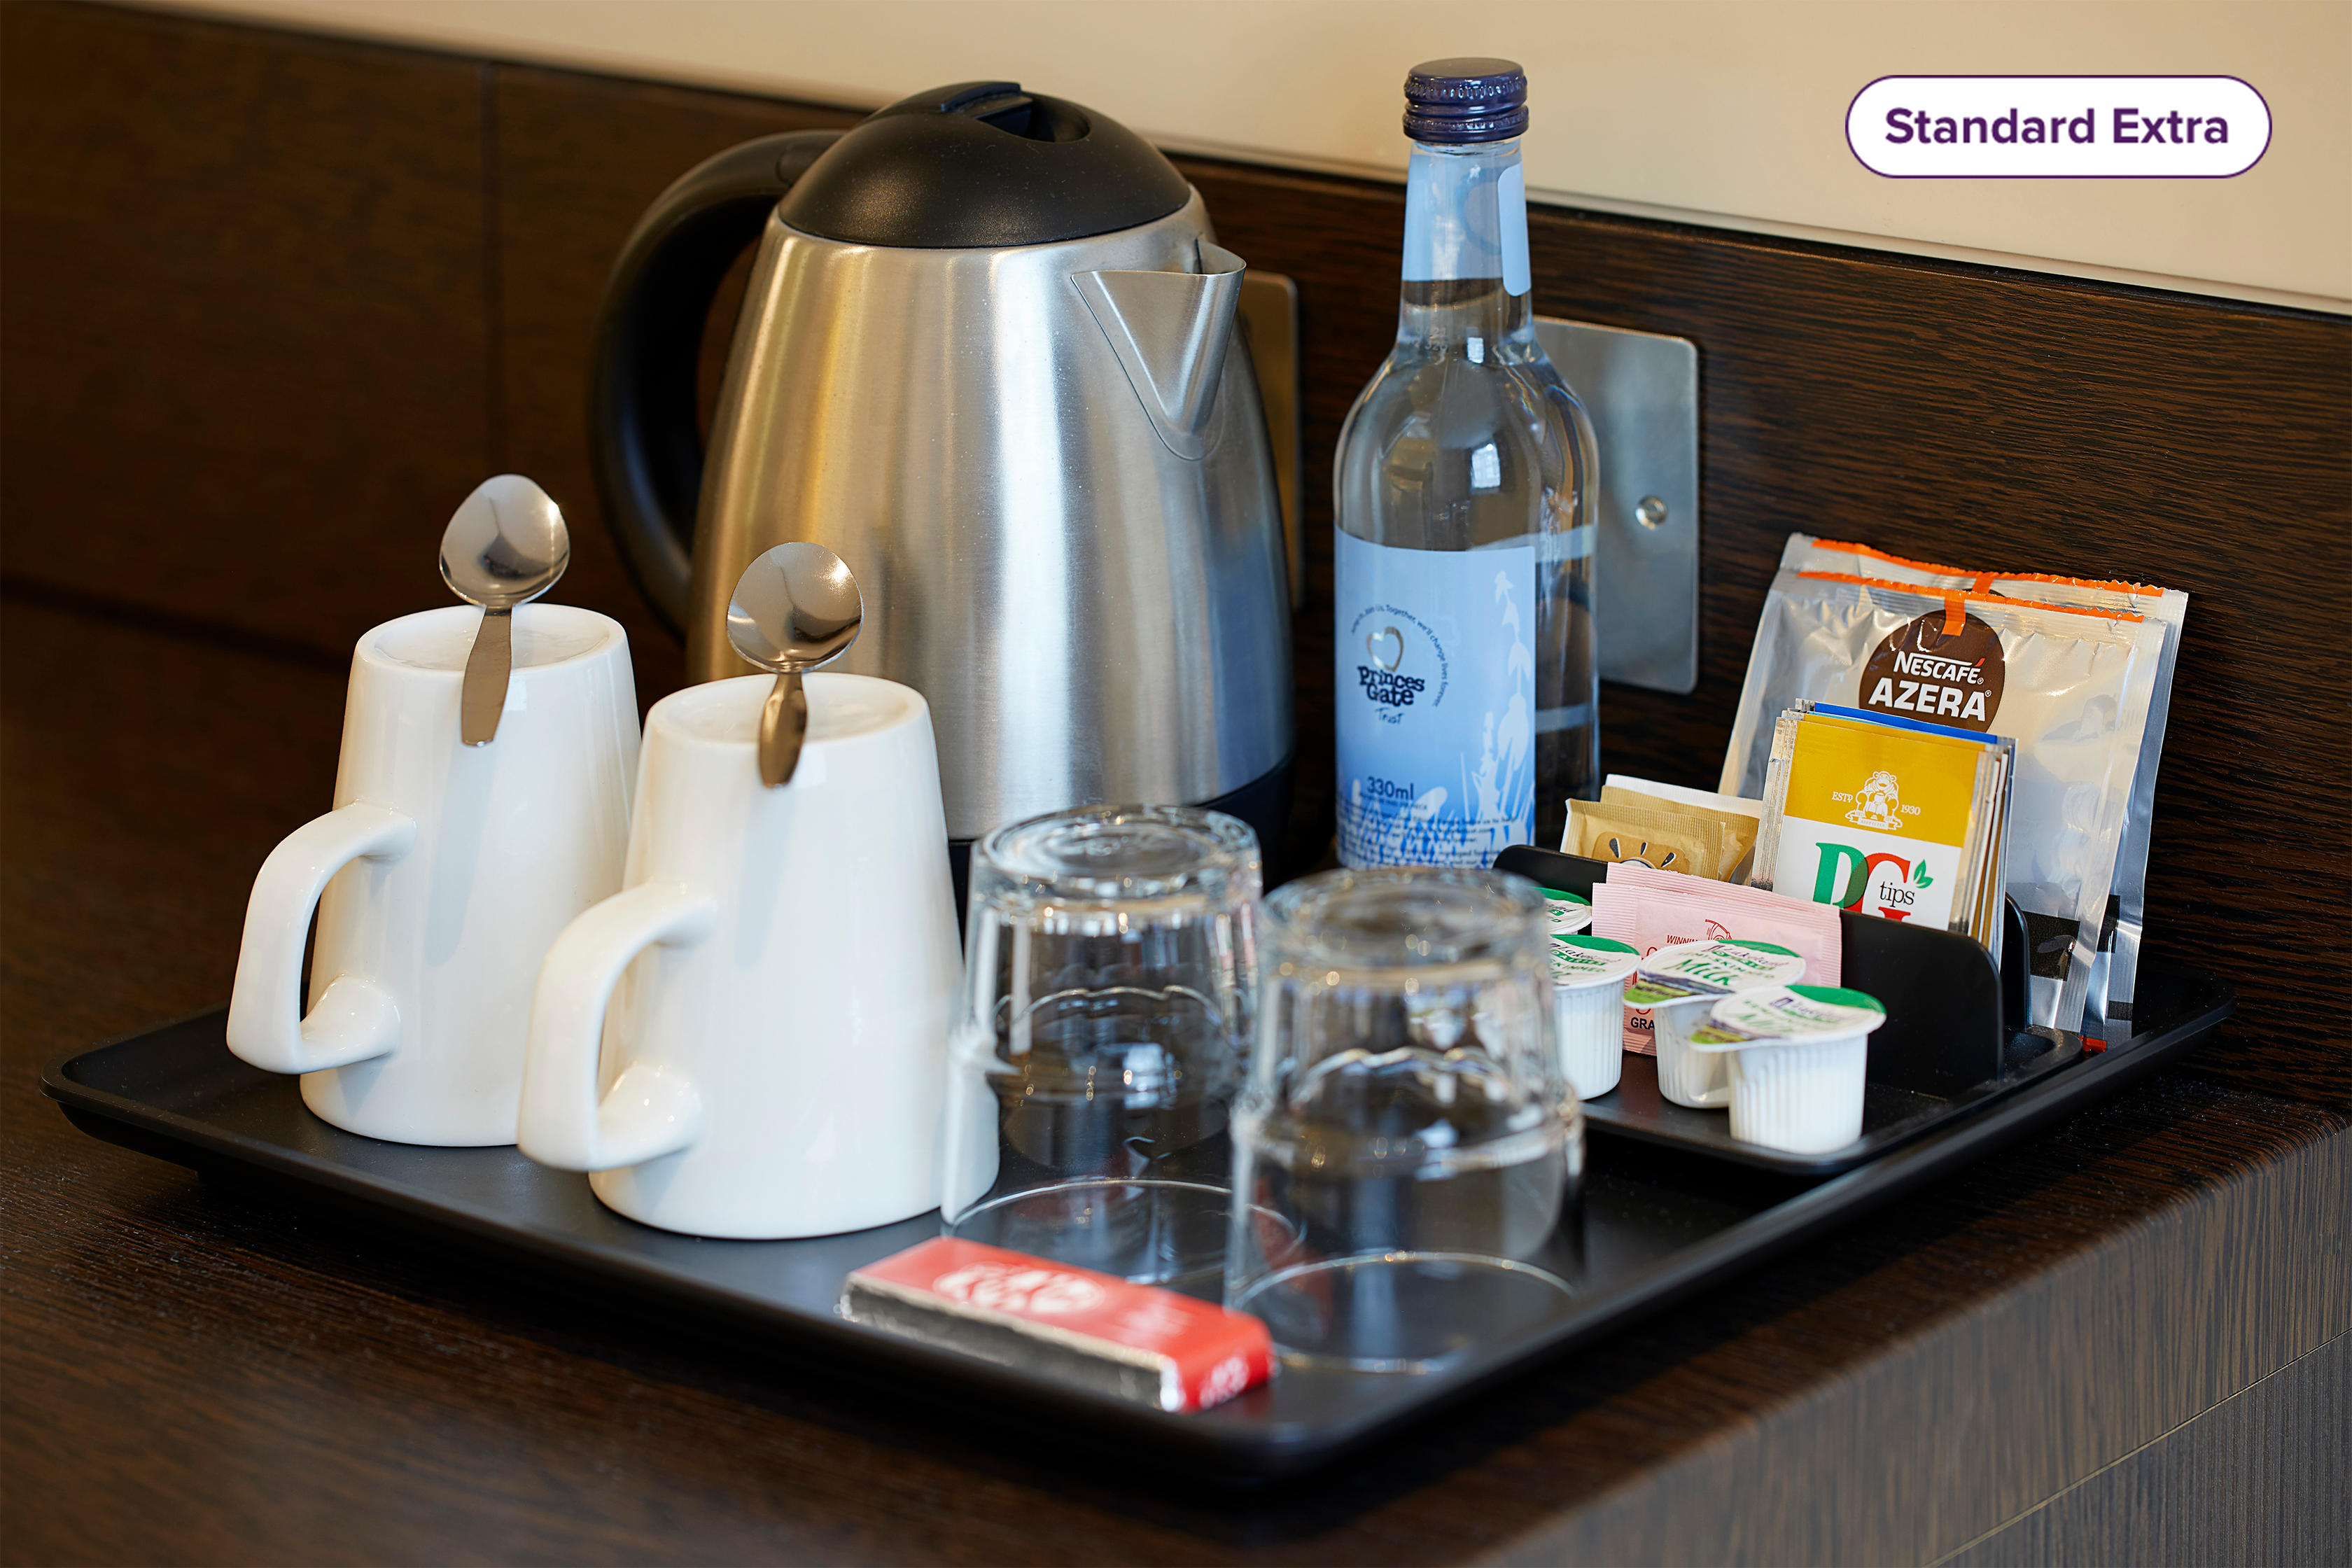 Standard Extra Bedroom with tea and coffee making facilities Premier Inn Newcastle City Centre Millennium Bridge hotel Newcastle upon Tyne 03333 211345